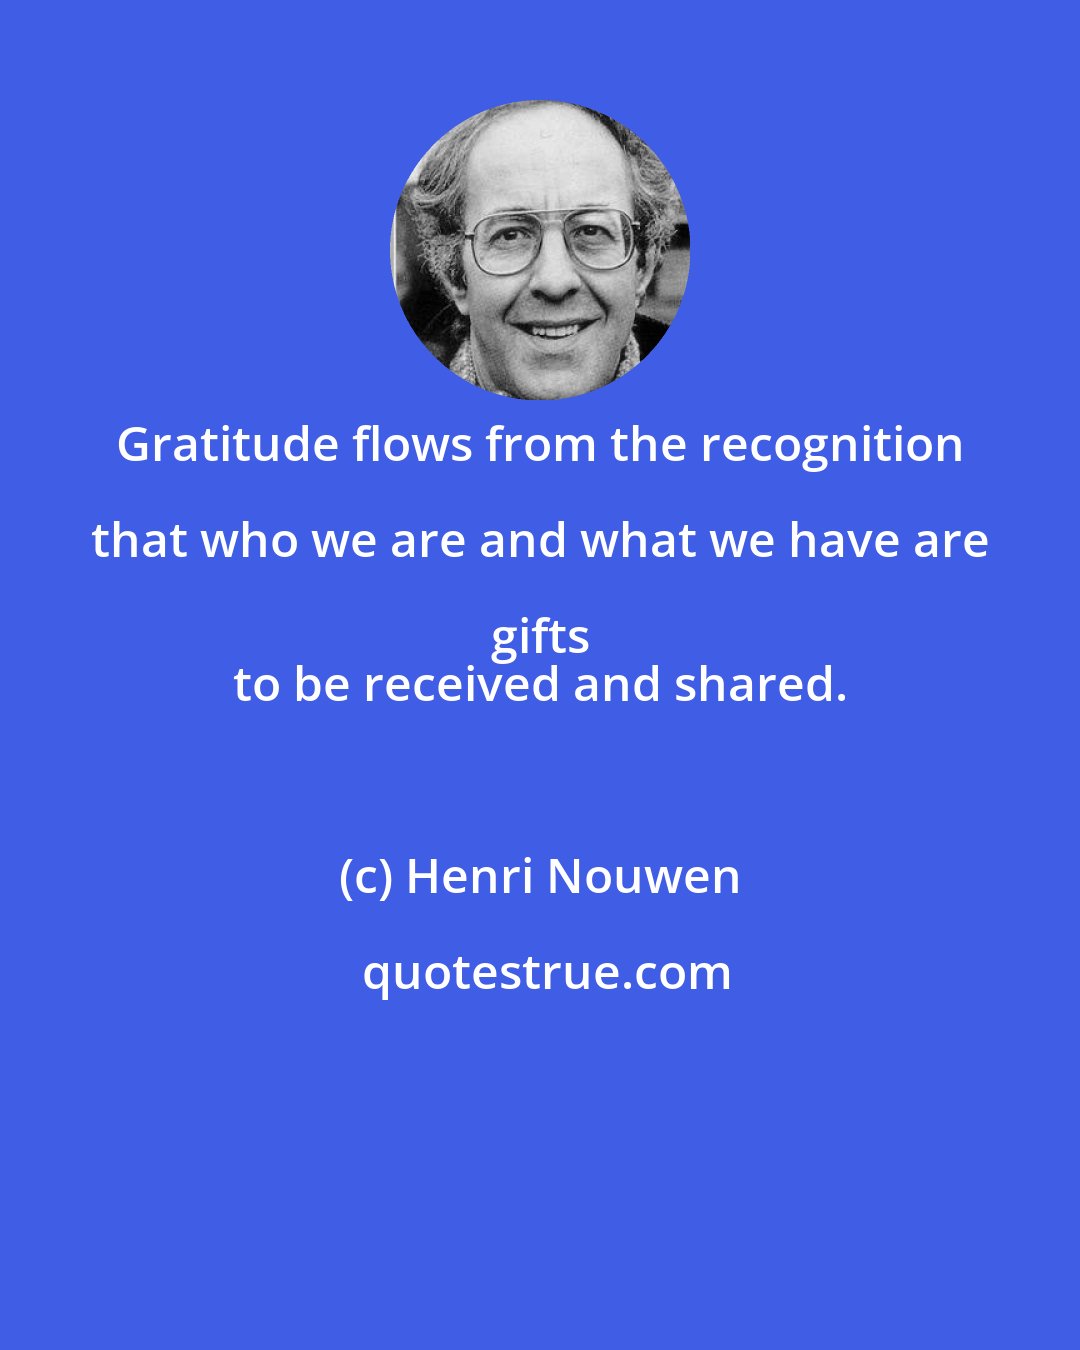 Henri Nouwen: Gratitude flows from the recognition that who we are and what we have are gifts 
 to be received and shared.